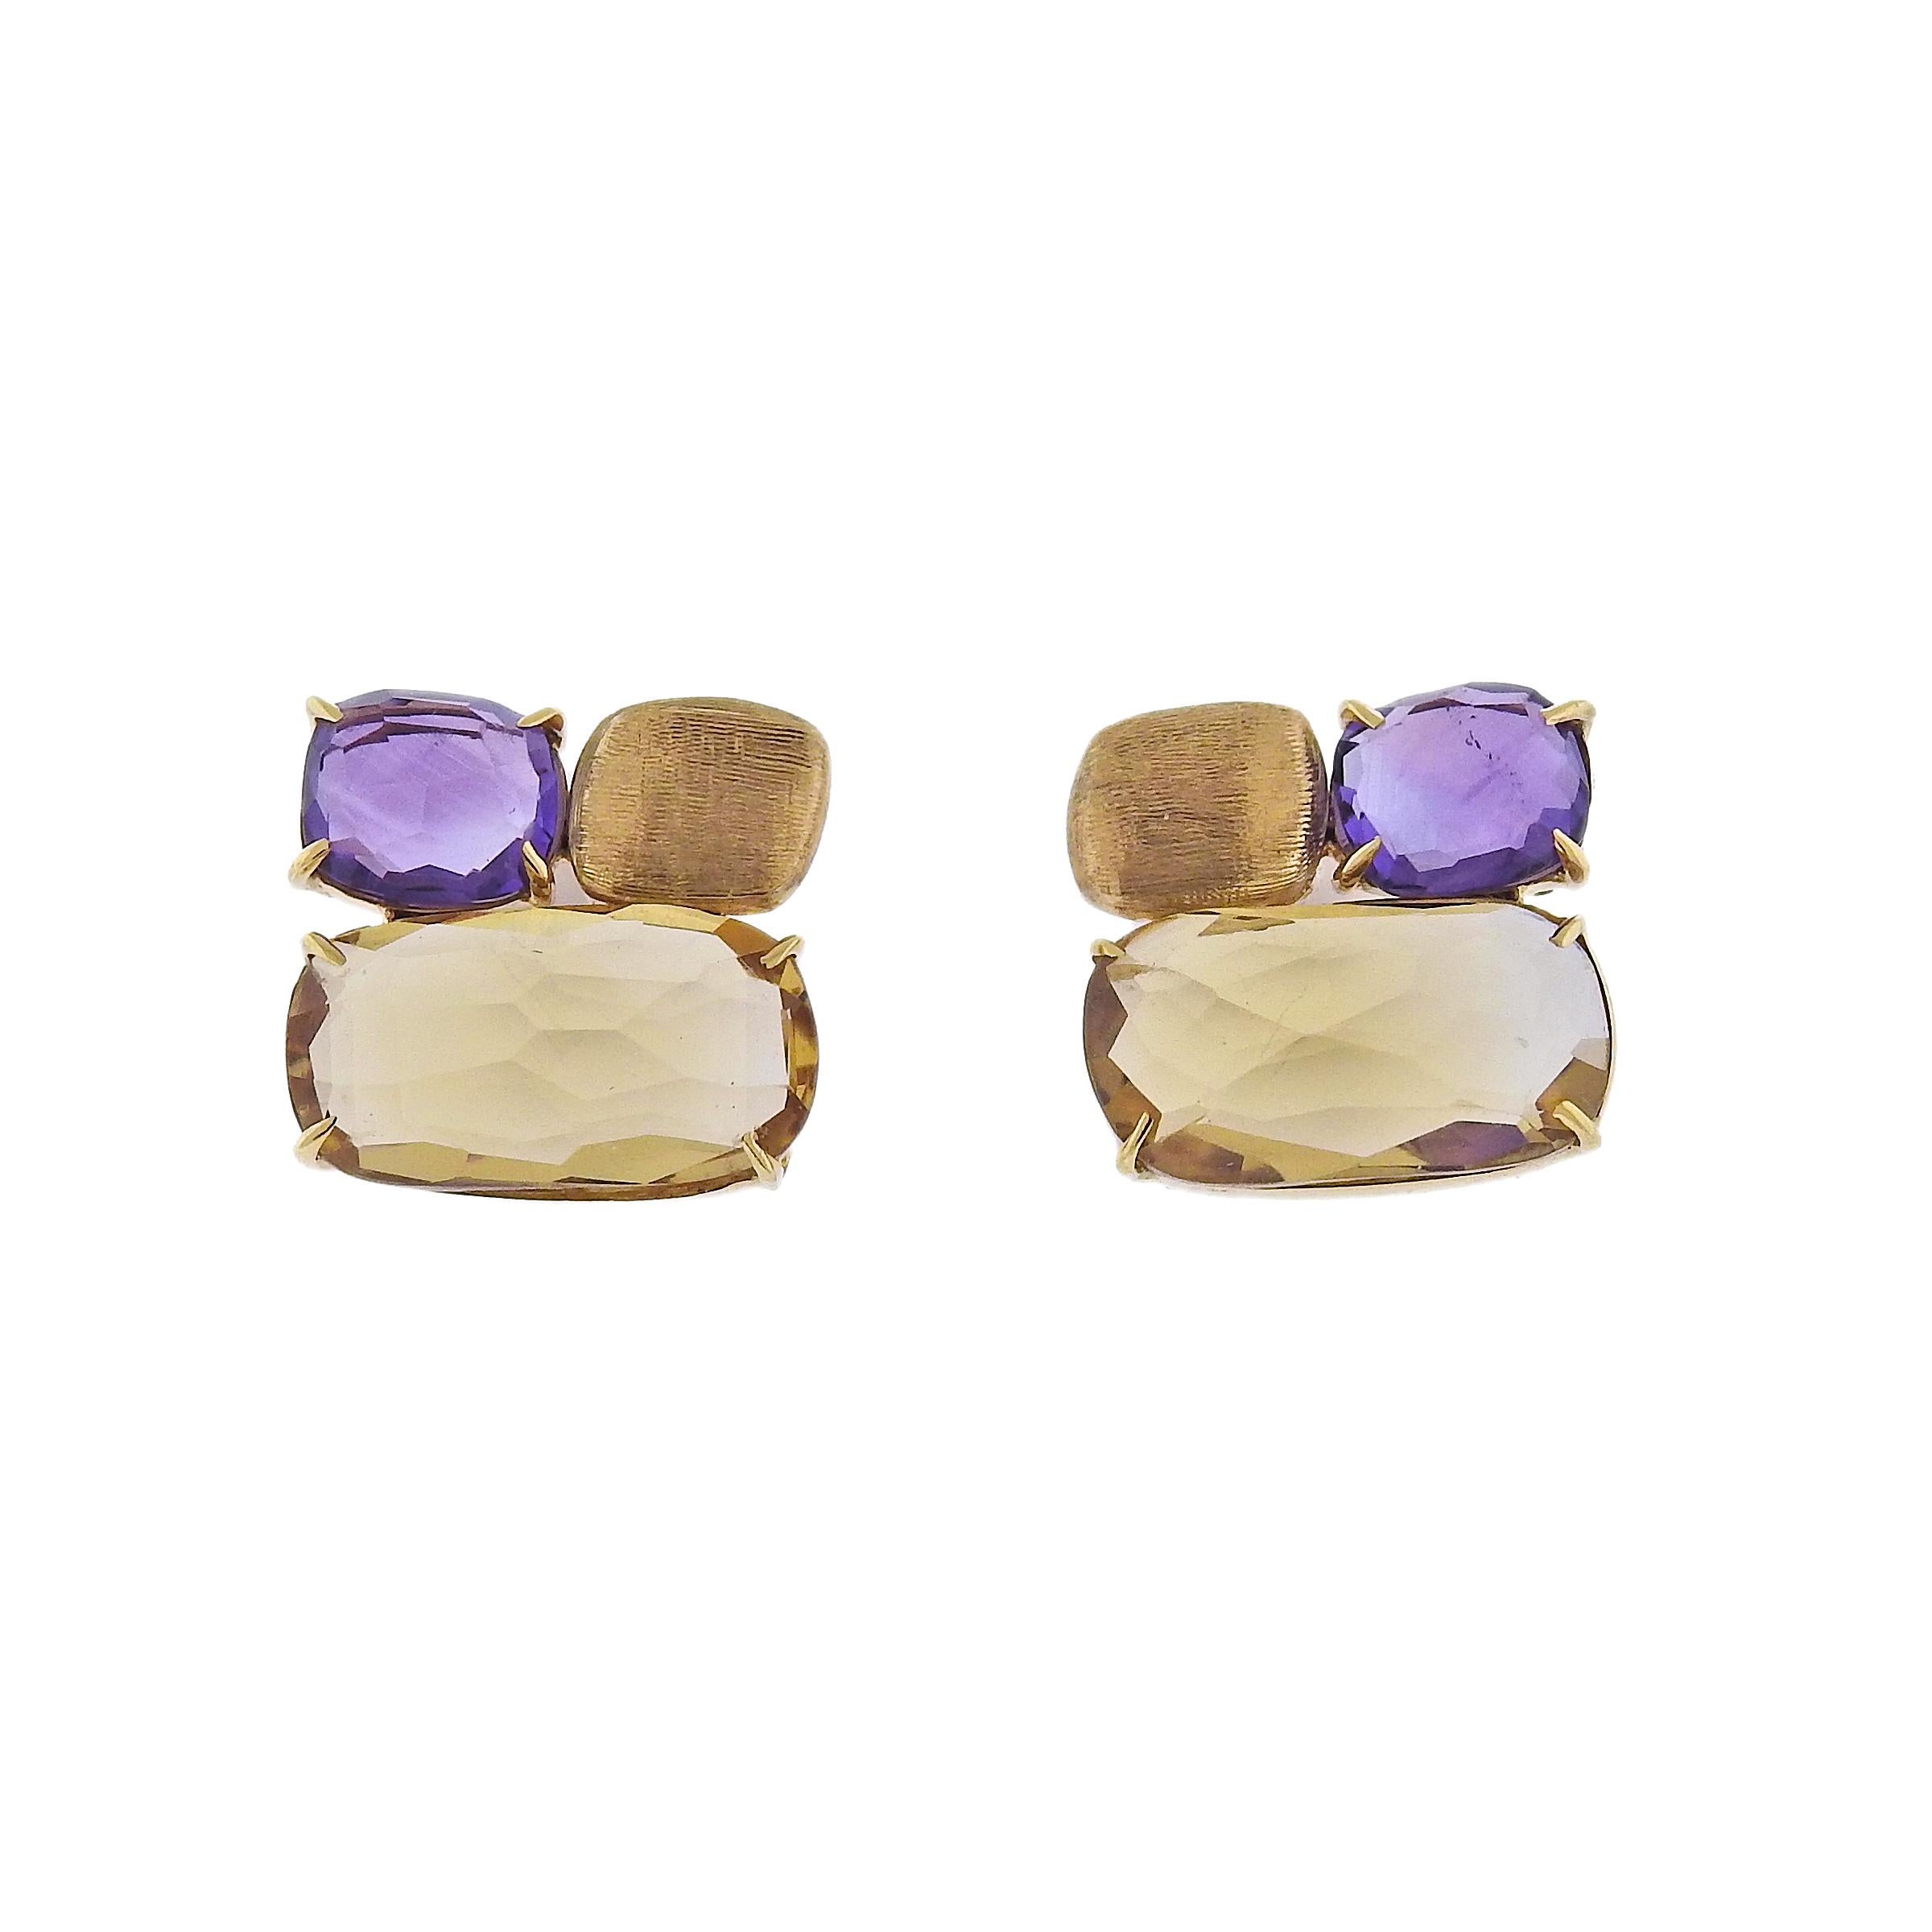 Marco Bicego Murano collection 18K yellow gold stud earrings, set with citrine and amethyst gemstones. Earrings measure 14mm x 13mm. Marked: Marco Bicego, Made in Italy, 750. Weight is 5.2 grams.